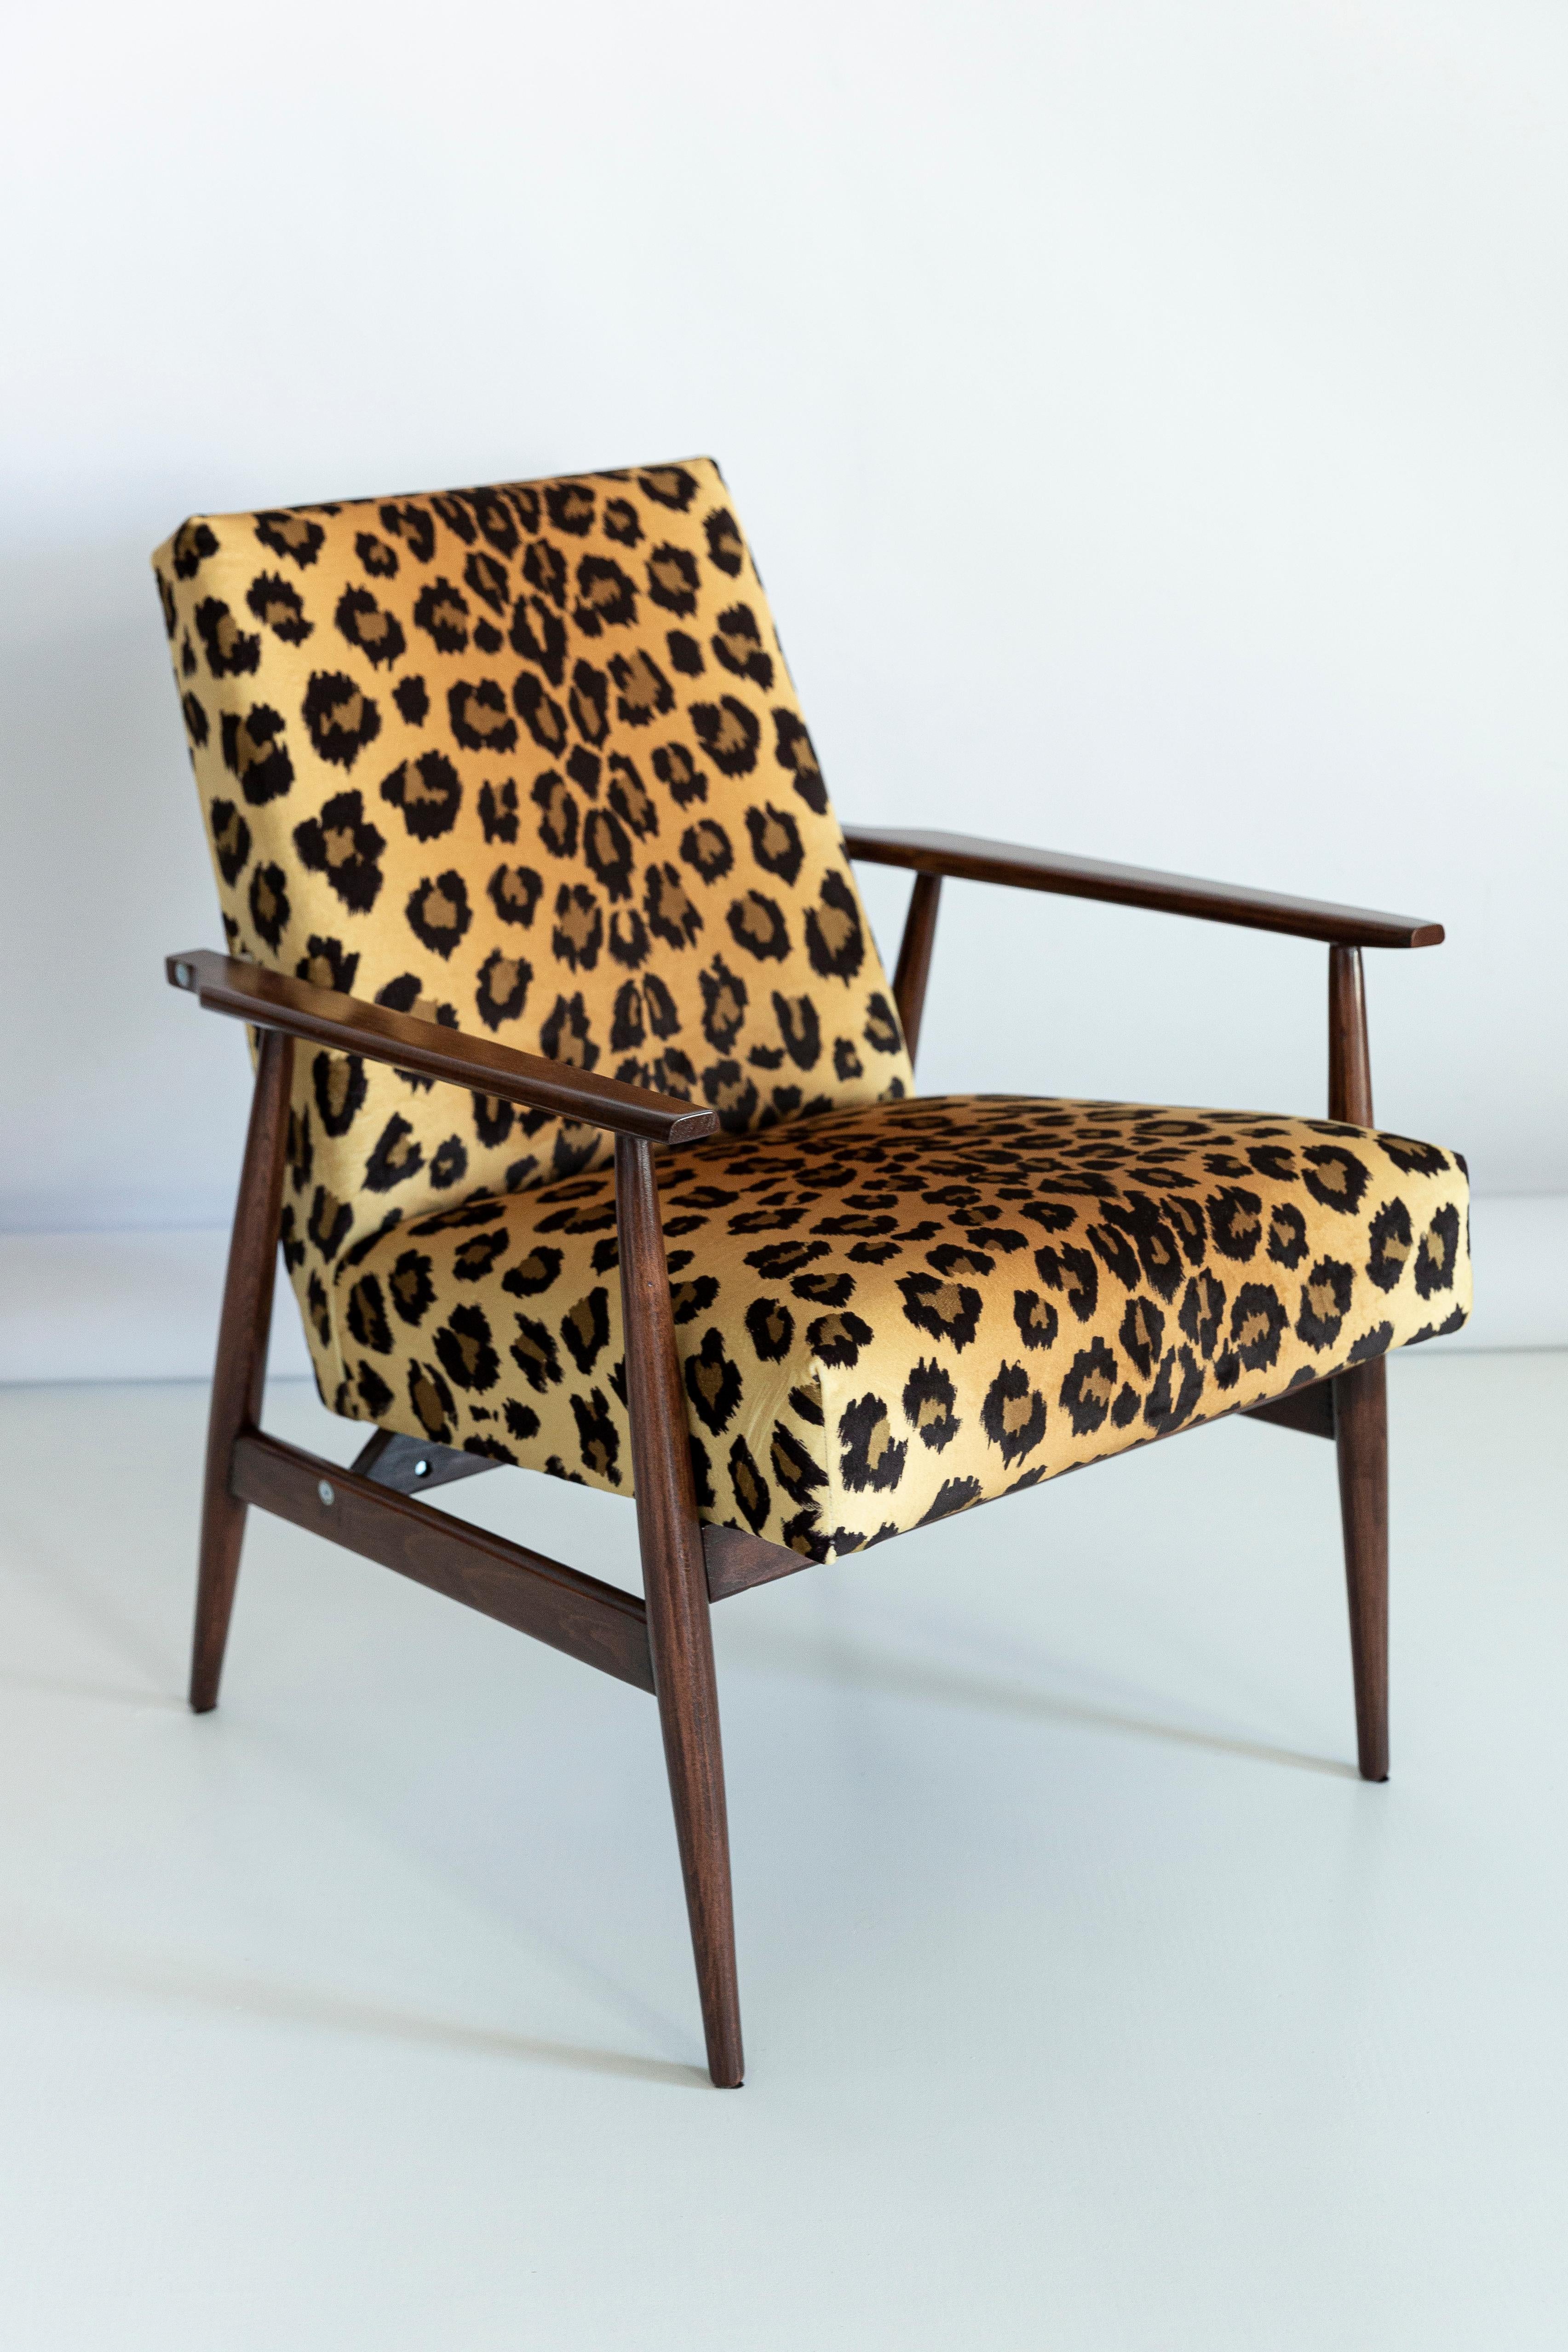 Set of twelve beautiful, restored armchairs designed by Henryk Lis. Furniture after full carpentry and upholstery renovation. The fabric, which is covered with a backrest and a seat, is a high-quality Italian velvet upholstery printed in leopard